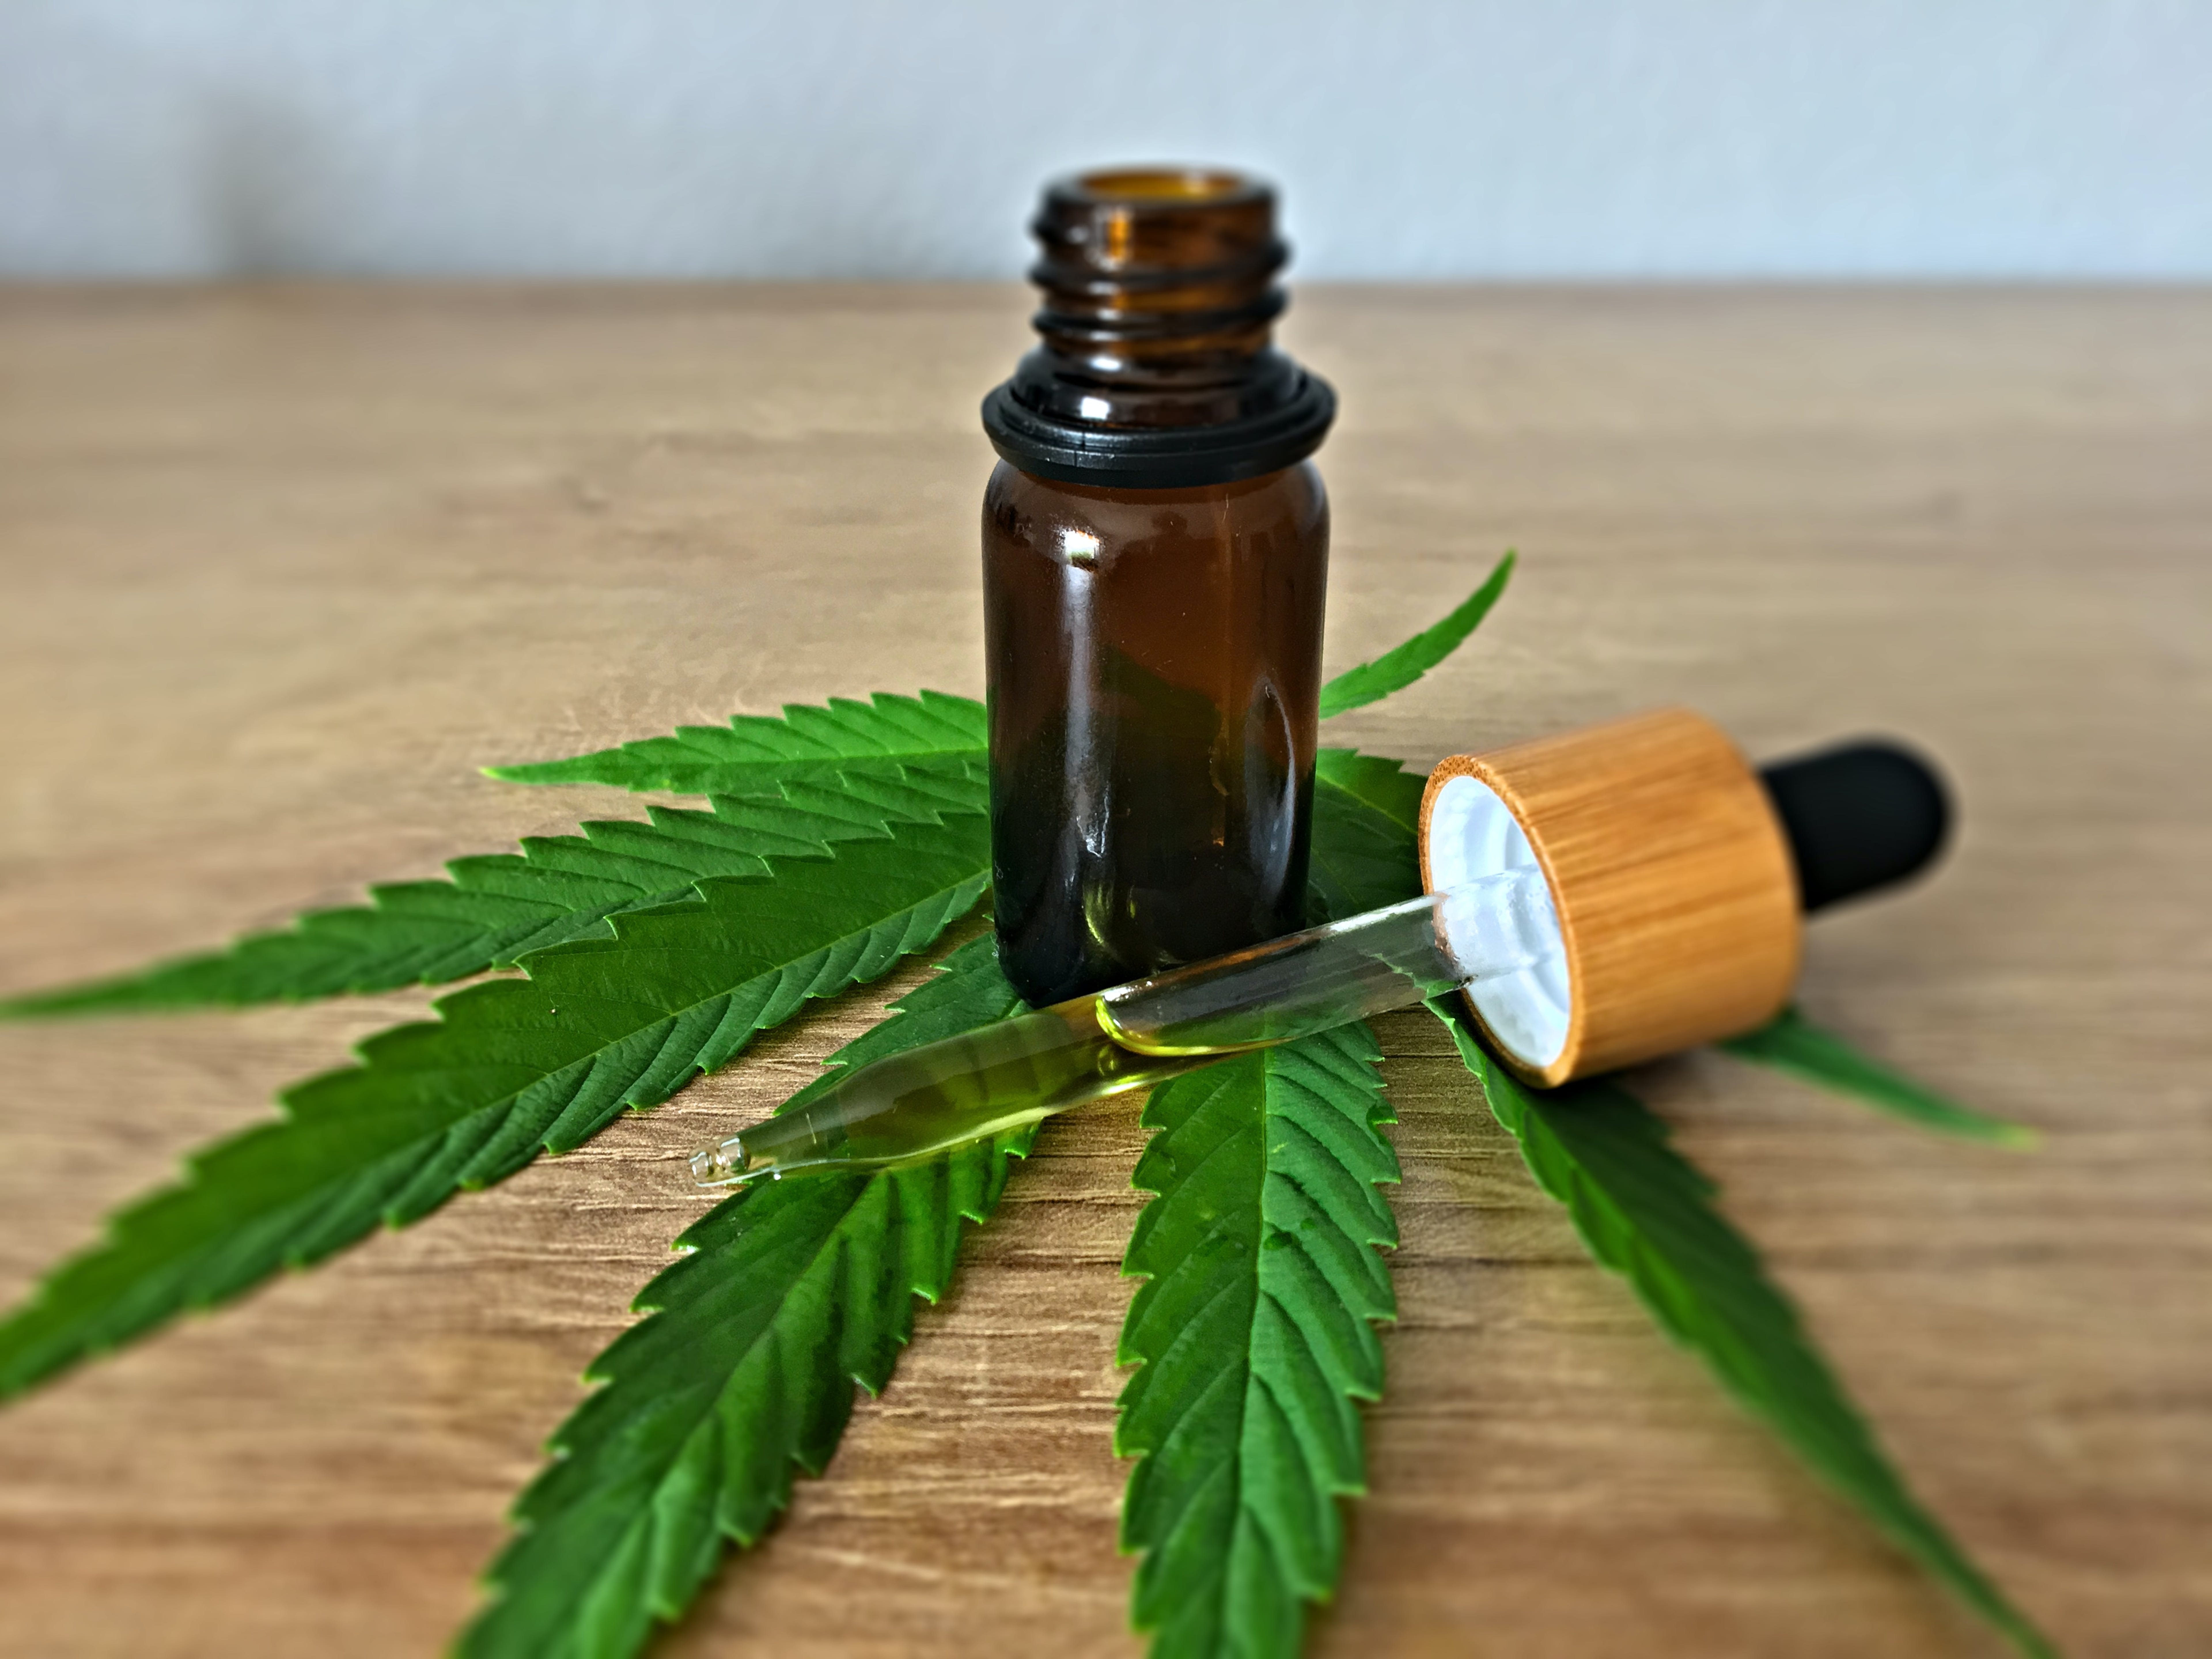 This Company Leads The Way In Cannabinoid Treatment Innovation With New Patent